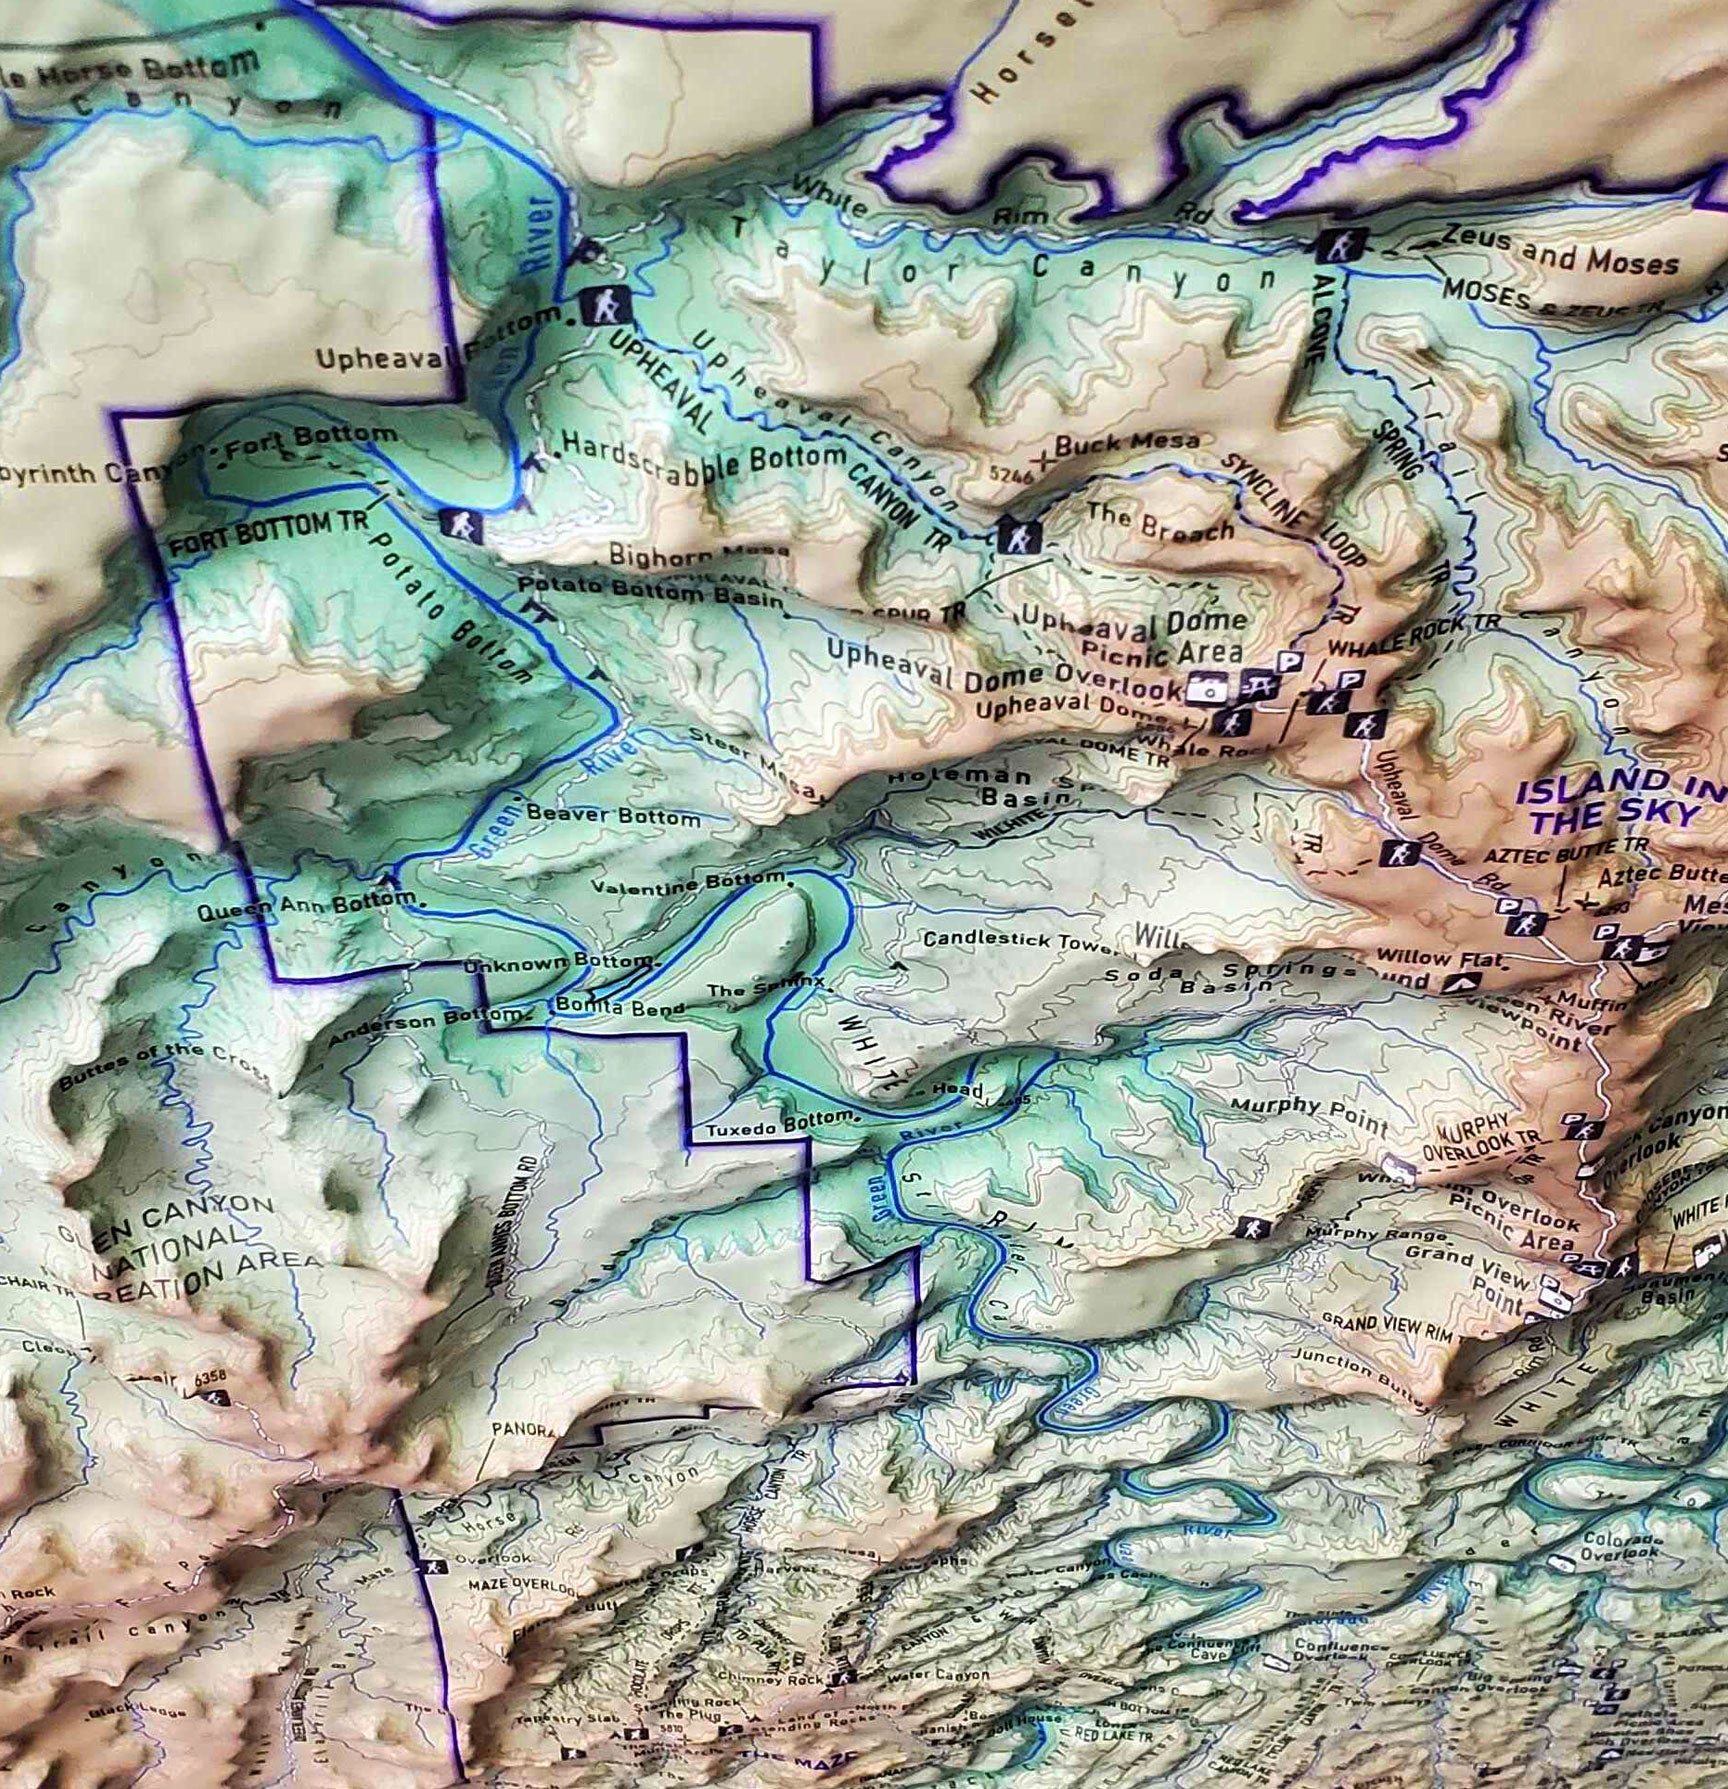 Three dimensional (3D) raised relief map of Canyonlands National Park, Utah, showcasing The Needles, The Maze, and Mesa Arch in stunning detail. The map highlights canyons, mesas, buttes, and rivers that shape this dramatic landscape.